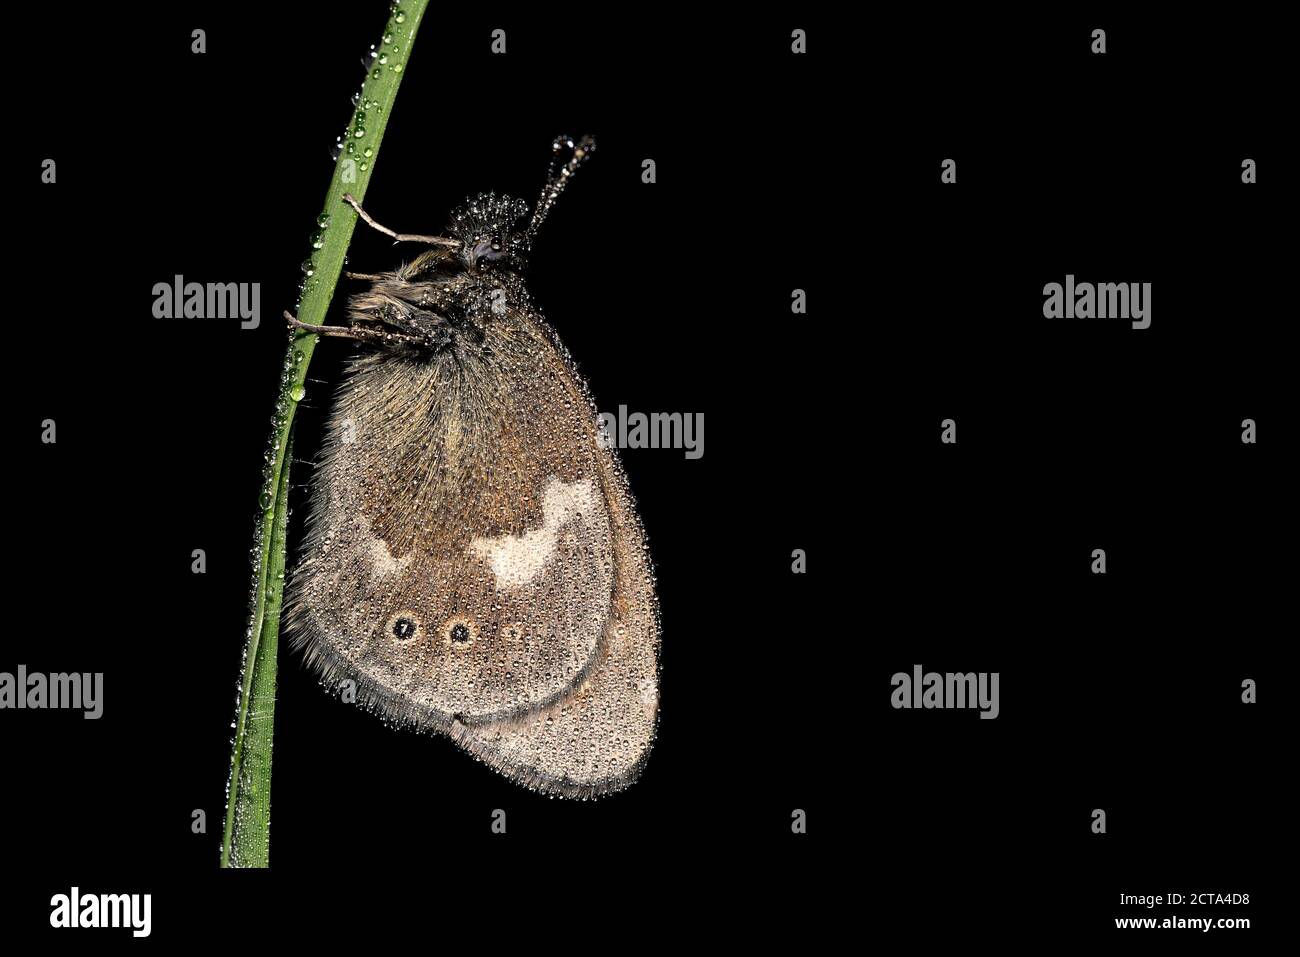 Large heath, Coenonympha tulliaon, hanging on wet blade of grass, in front of black background Stock Photo